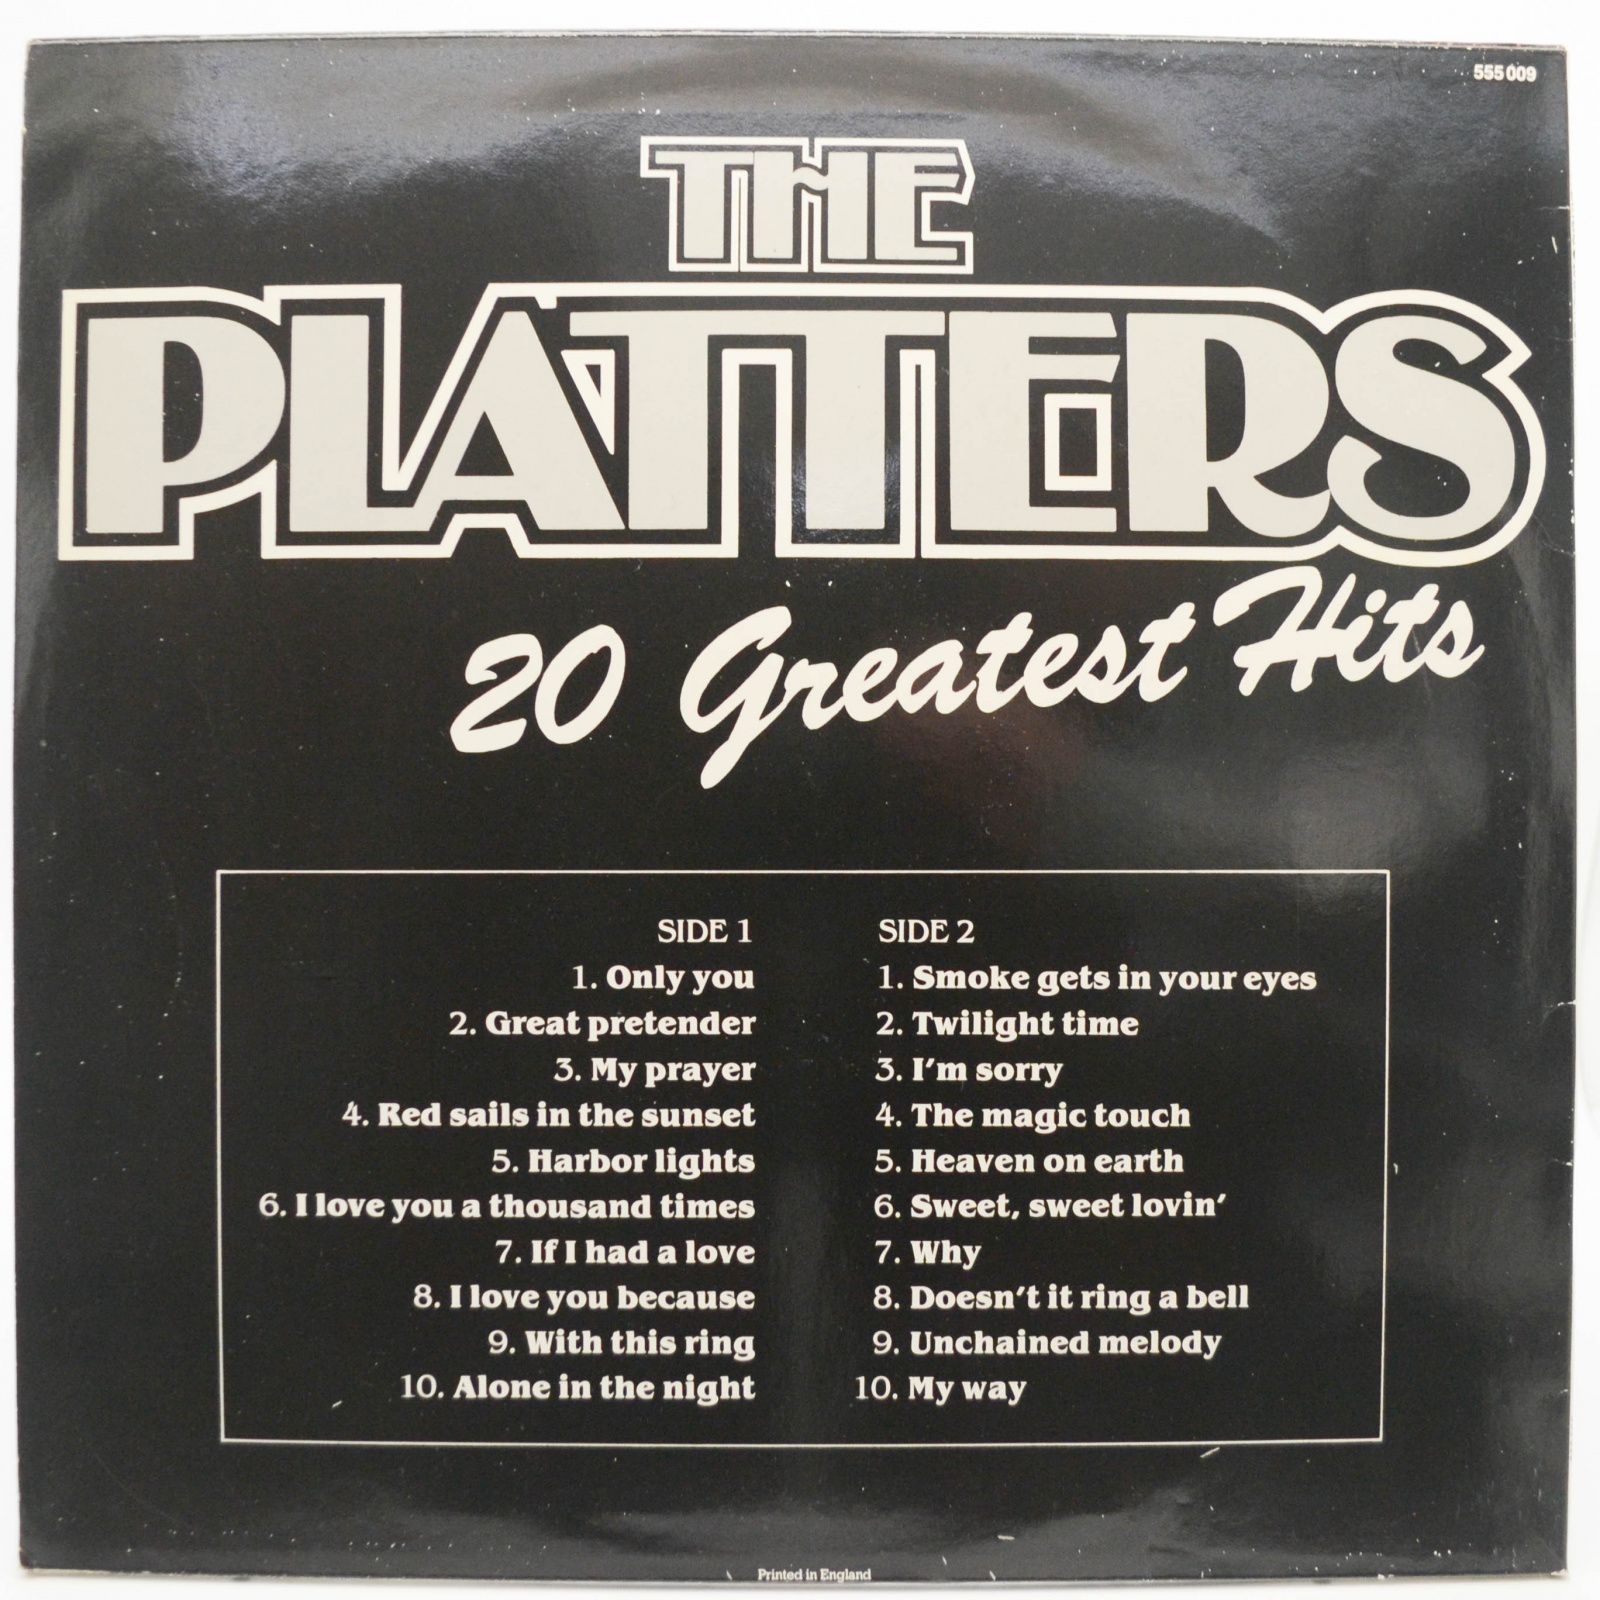 Platters — 20 Greatest Hits, 1982